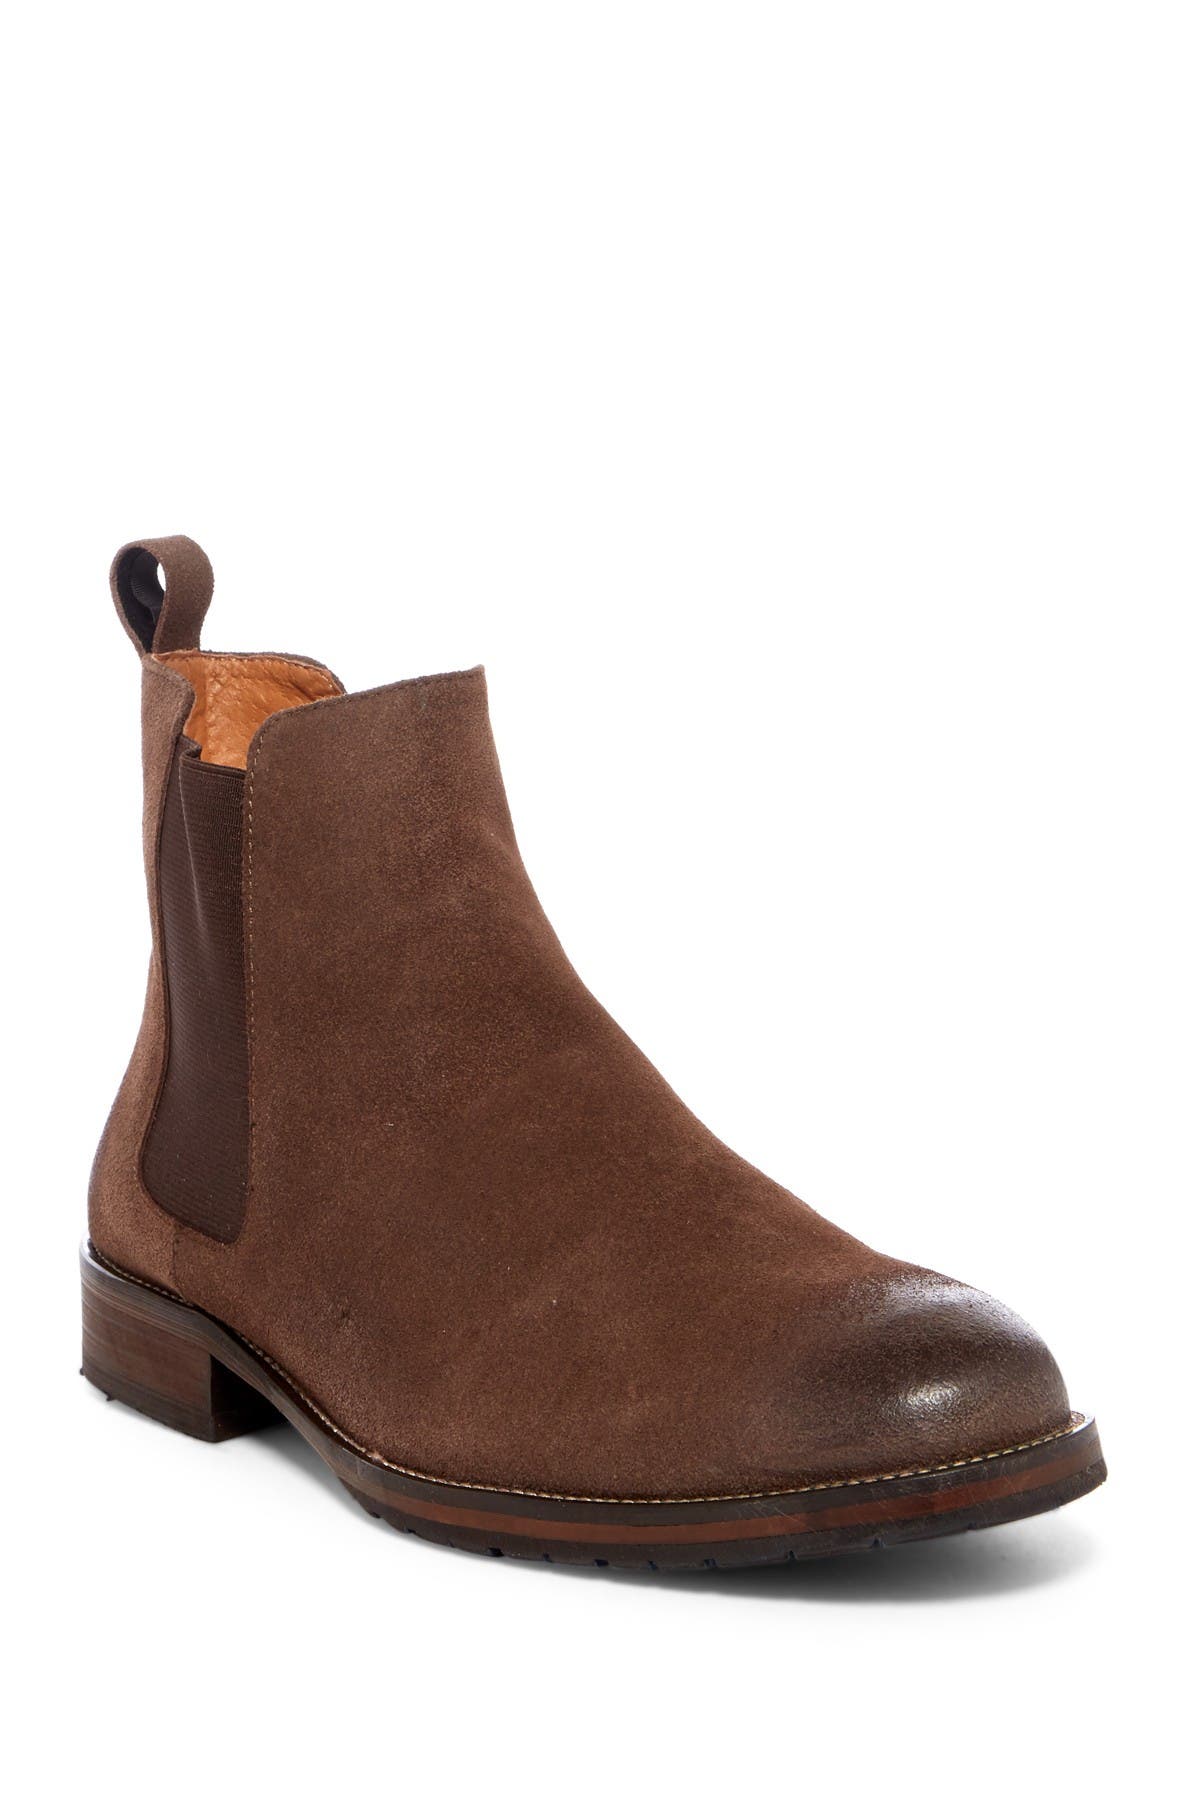 Vintage Foundry | Dress Sports Suede Chelsea Boot | Nordstrom Rack